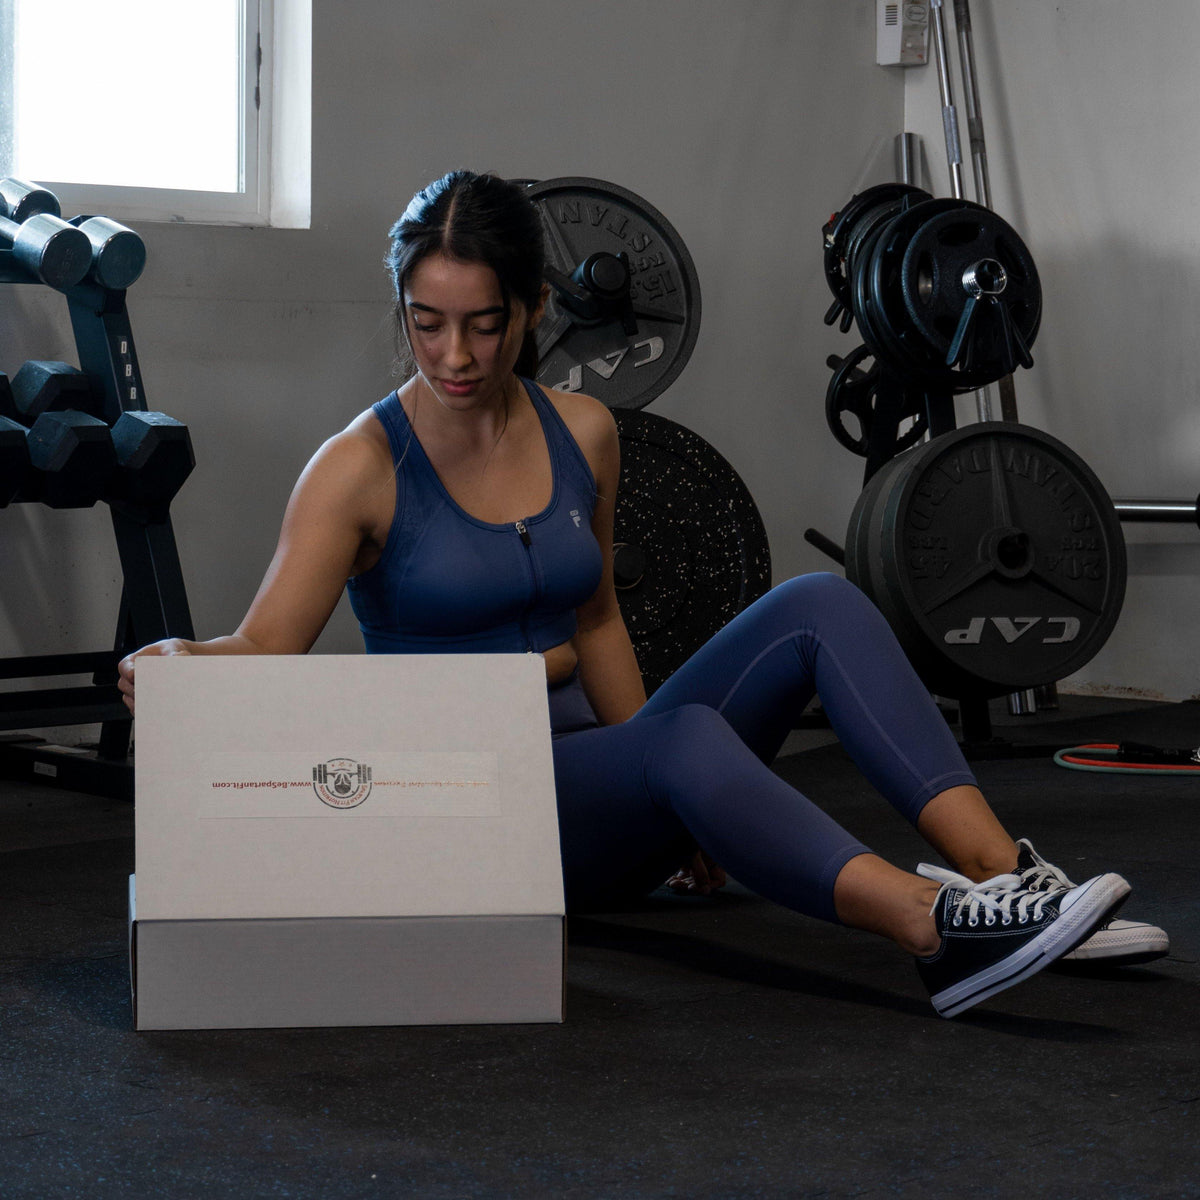 Personal Trainer exploring Home Gym Kit products at training facility. 